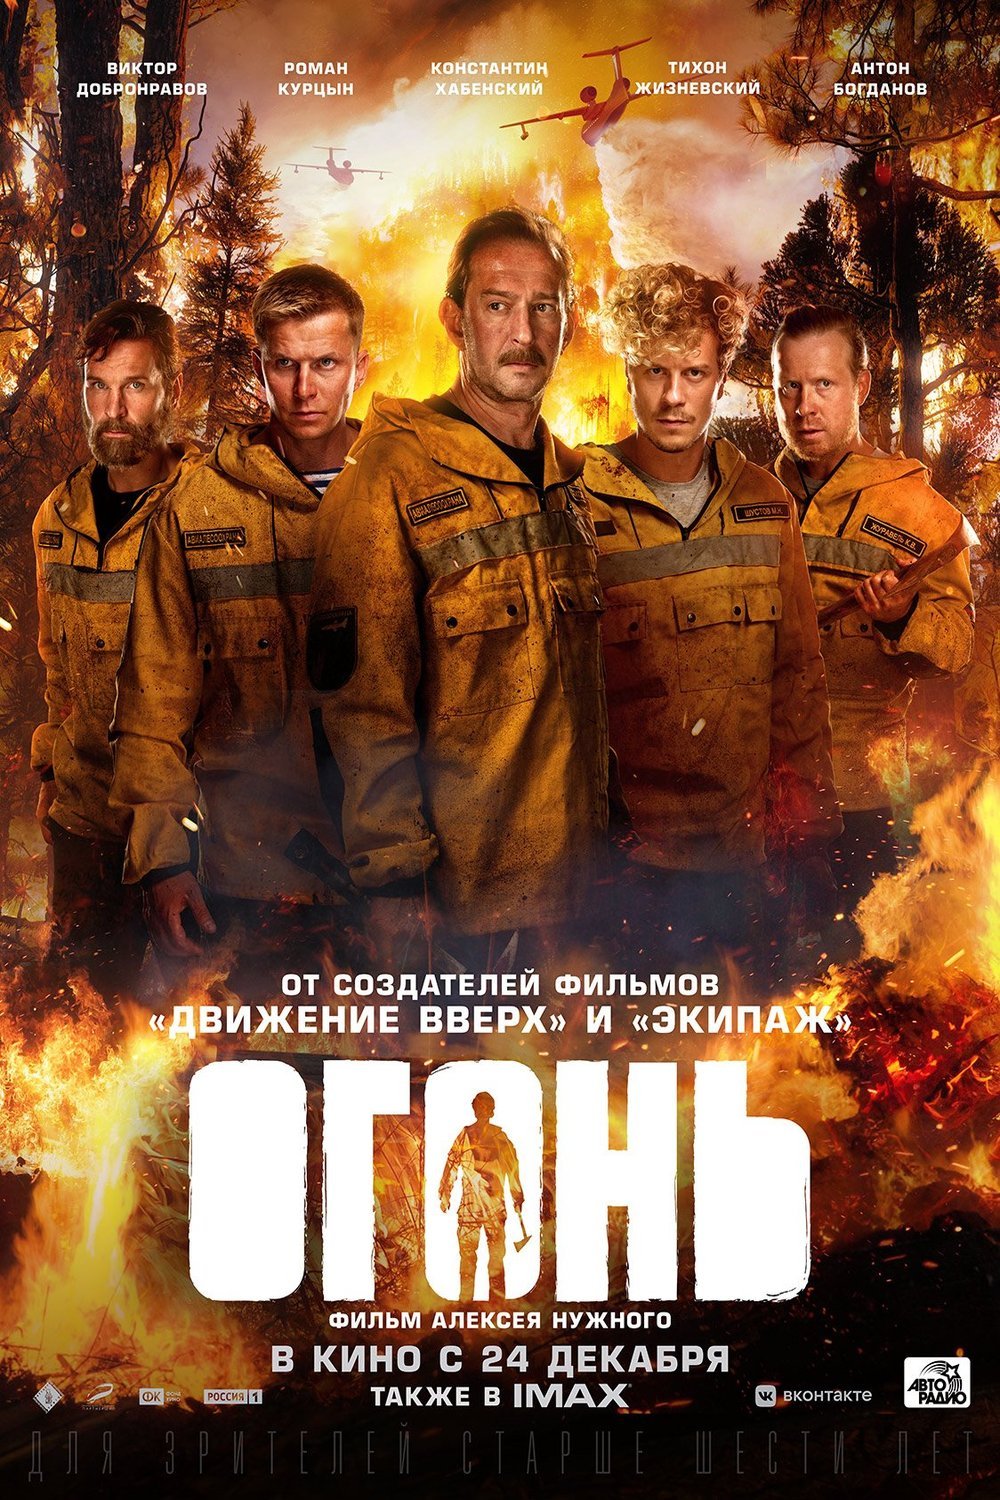 Russian poster of the movie Fire